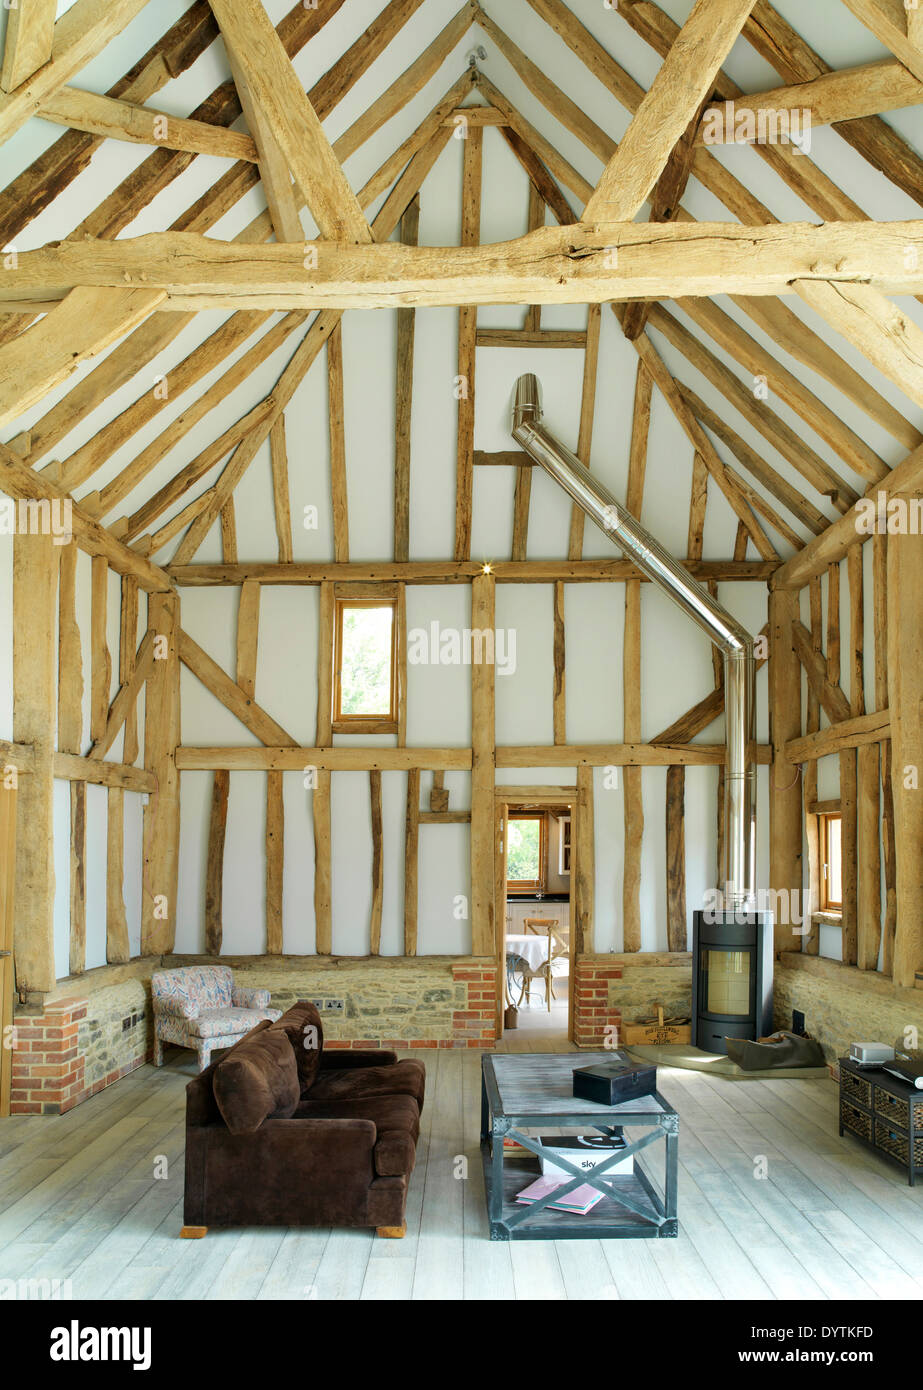 Living Room In Barn Conversion With Exposed Beams Field Place